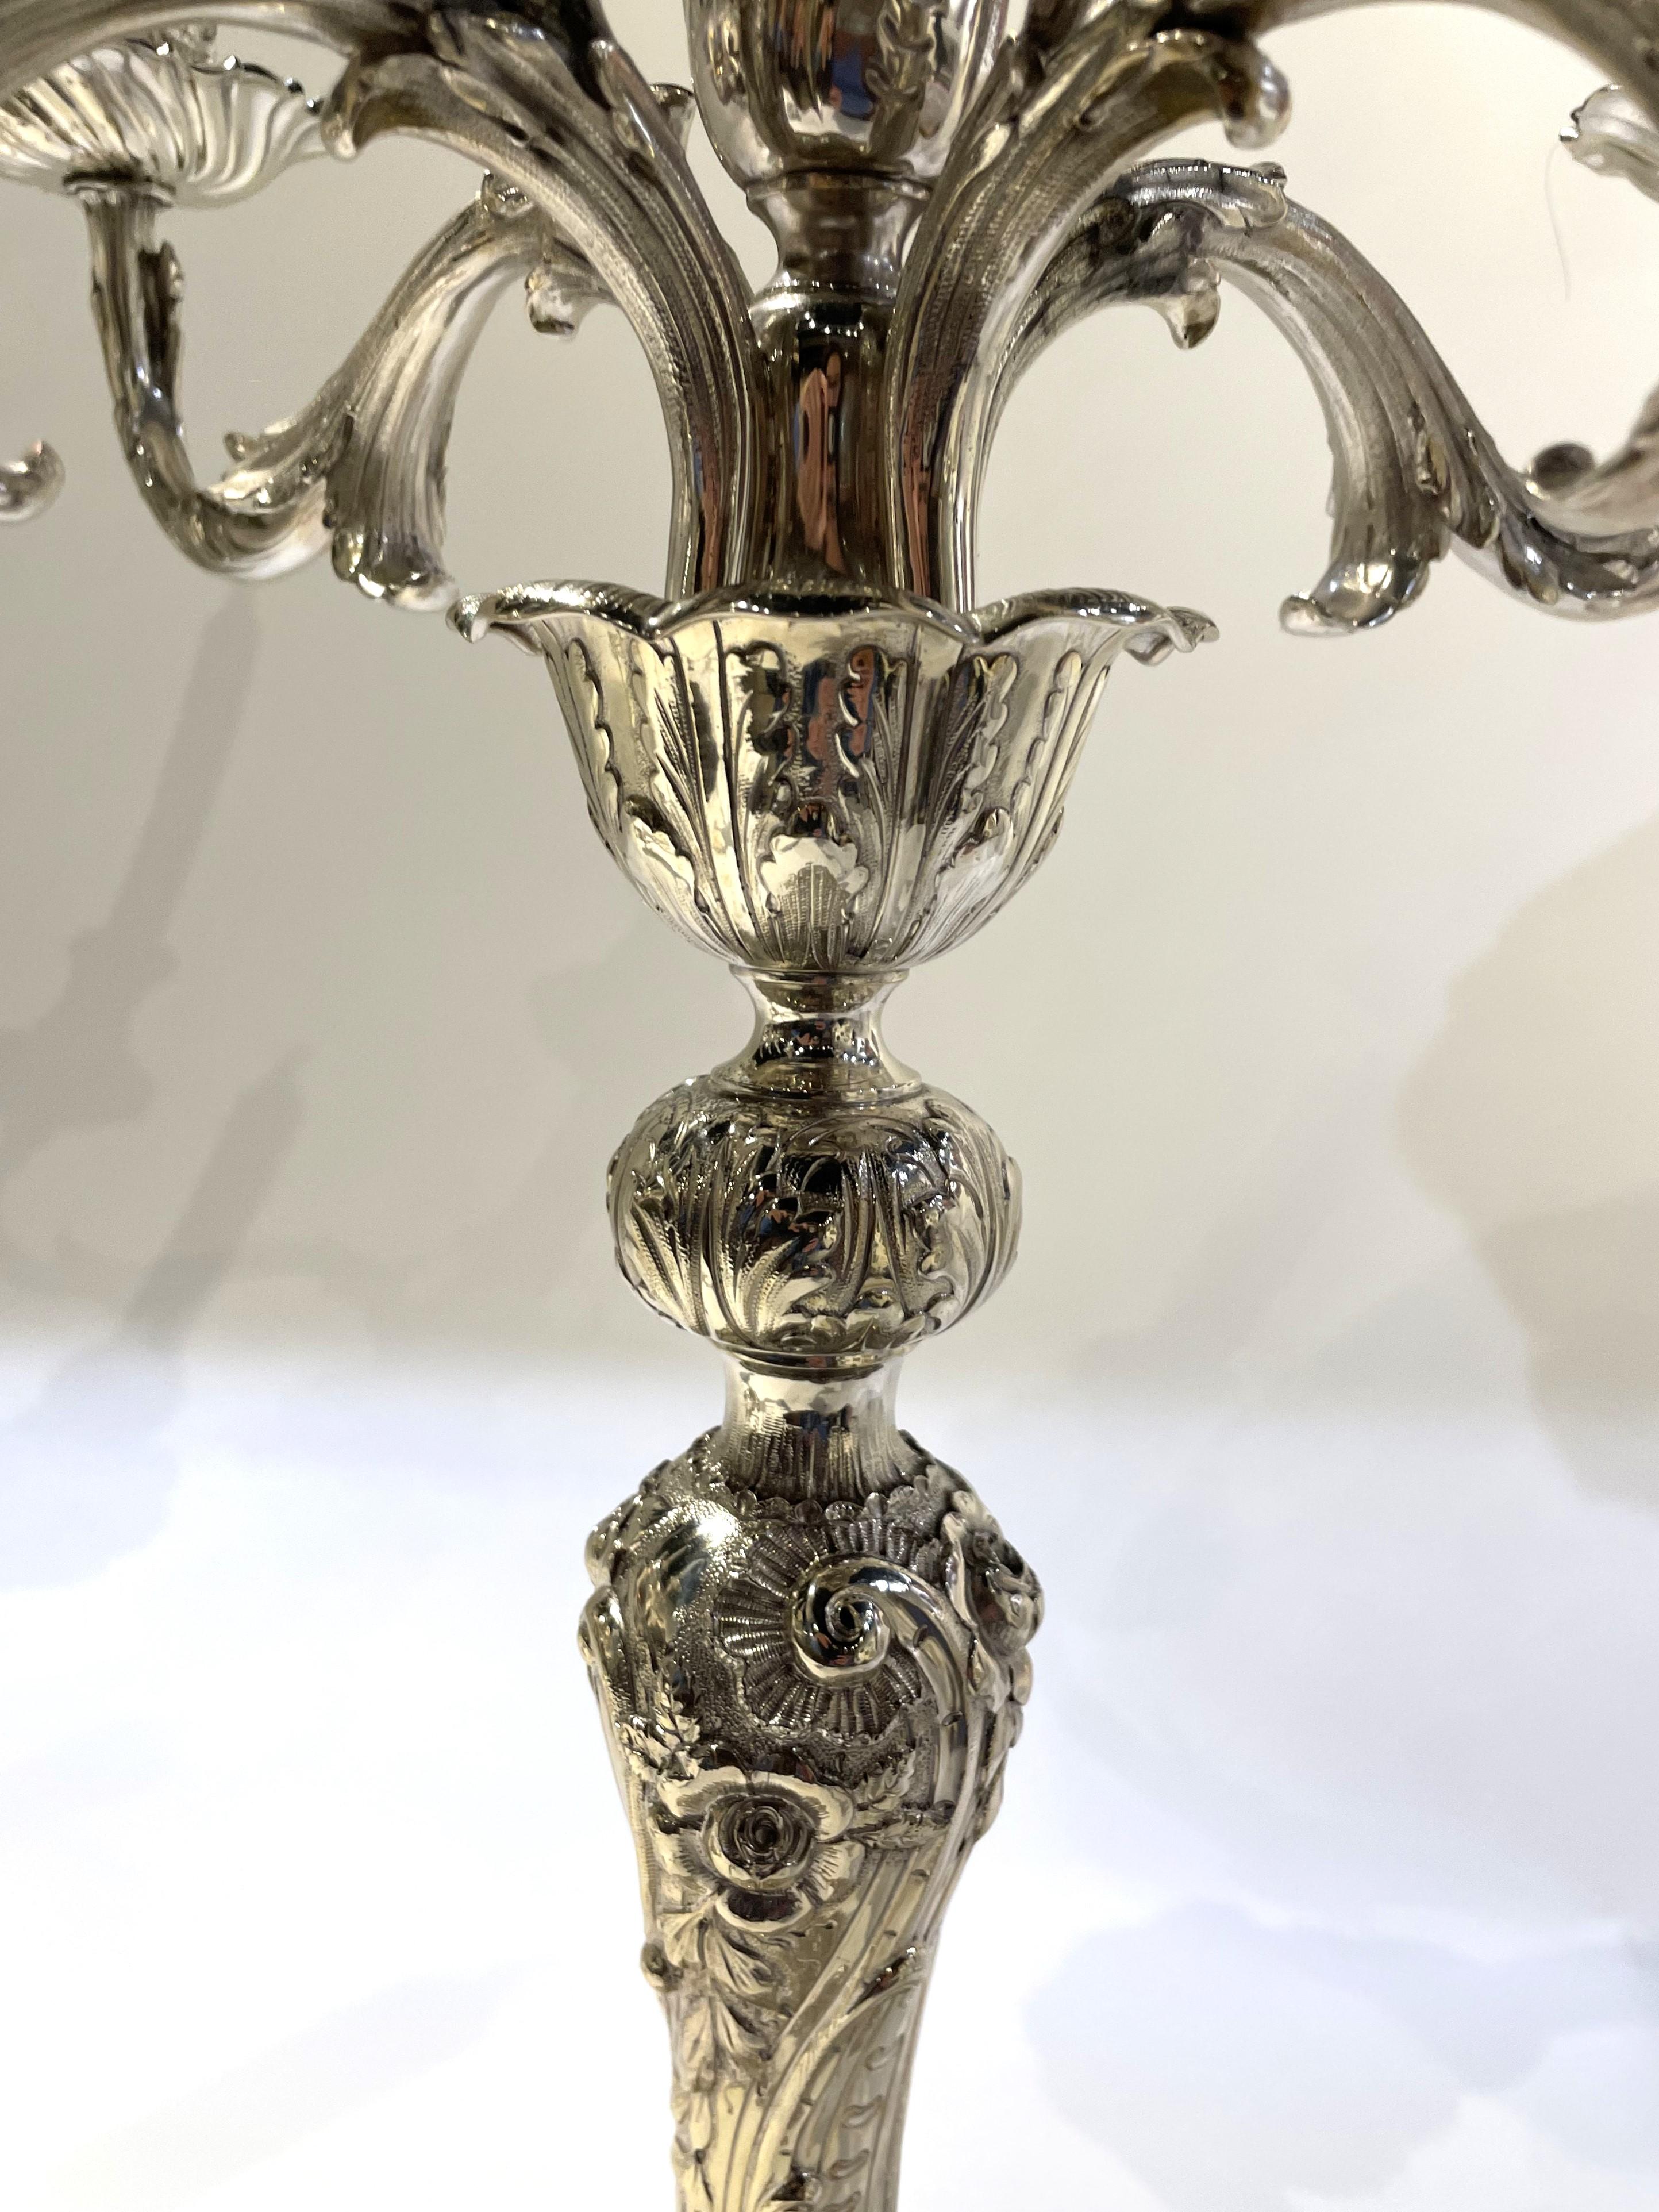 Pair of Tiffany & Co. Sterling Silver 5-Light Monumental Repousse Candelabra For Sale 2